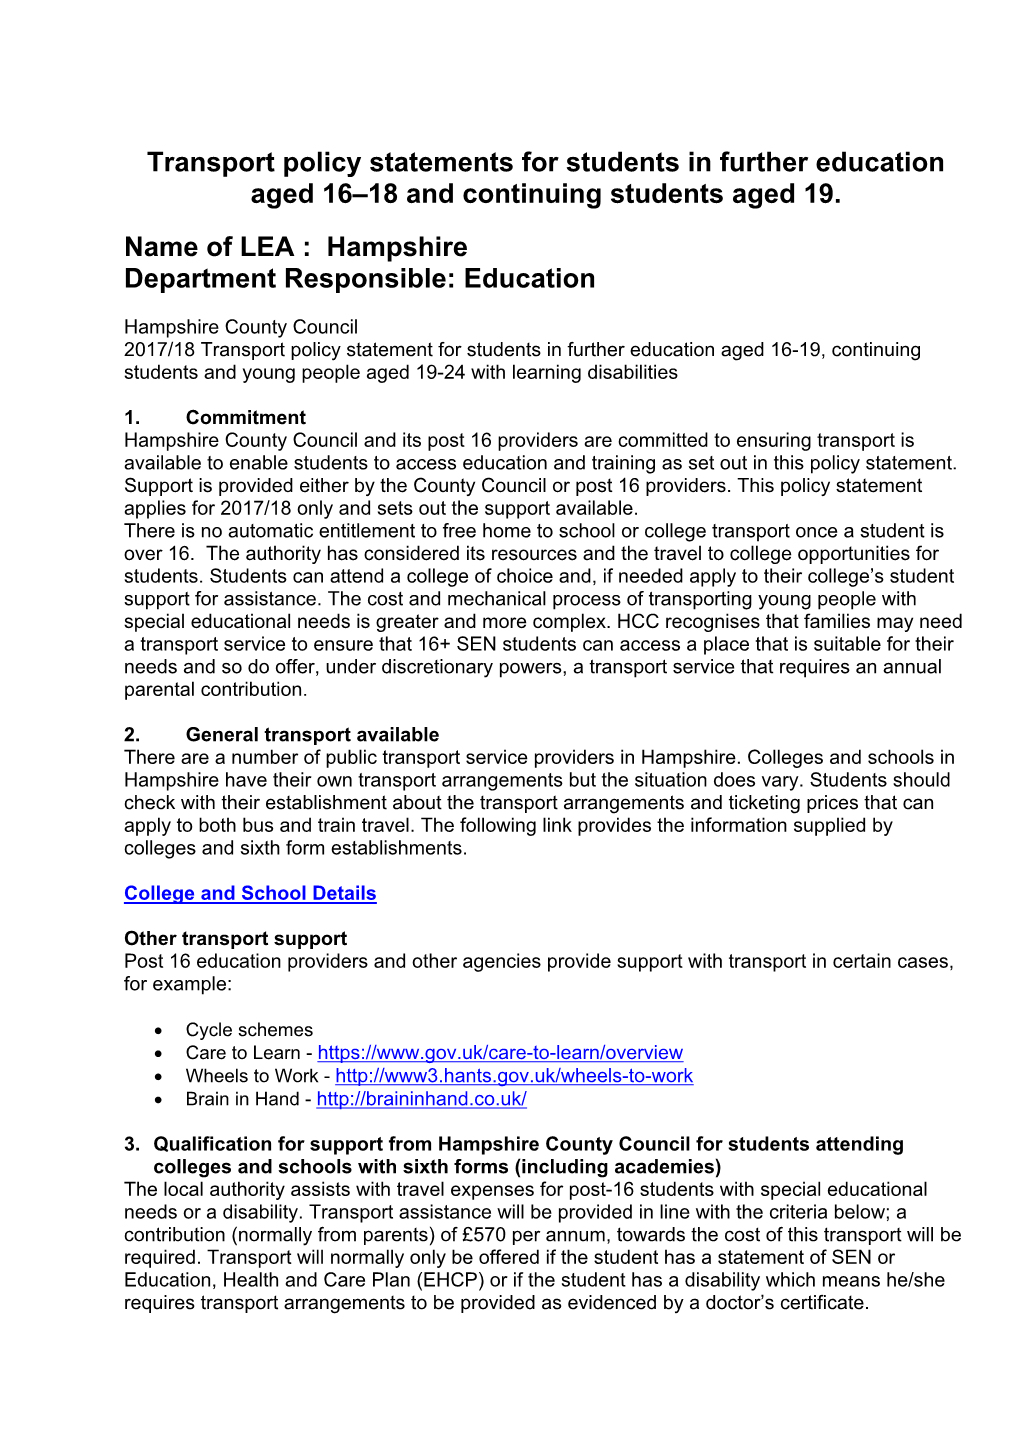 Transport Policy Statements for Students in Further Education Aged 16–18 and Continuing Students Aged 19. Name of LEA : Hampshire Department Responsible: Education